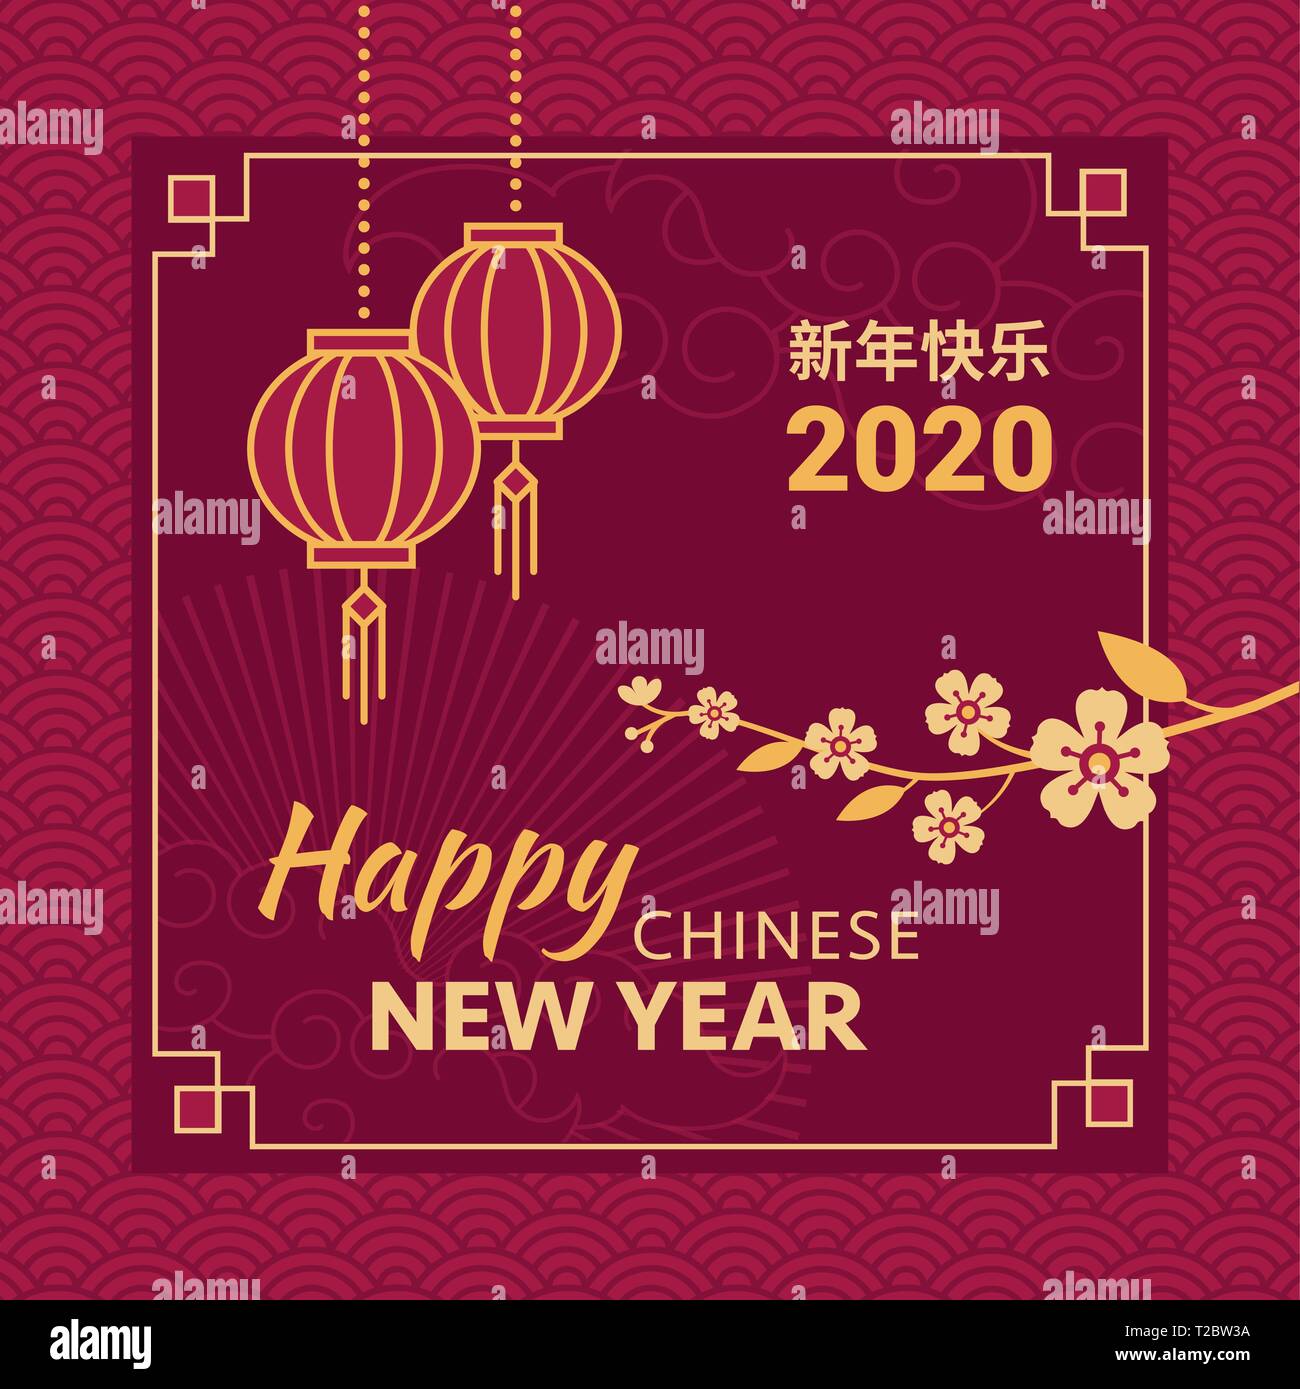 Happy Chinese New Year card and social media post with golden blossom flowers and red lanterns Stock Vector